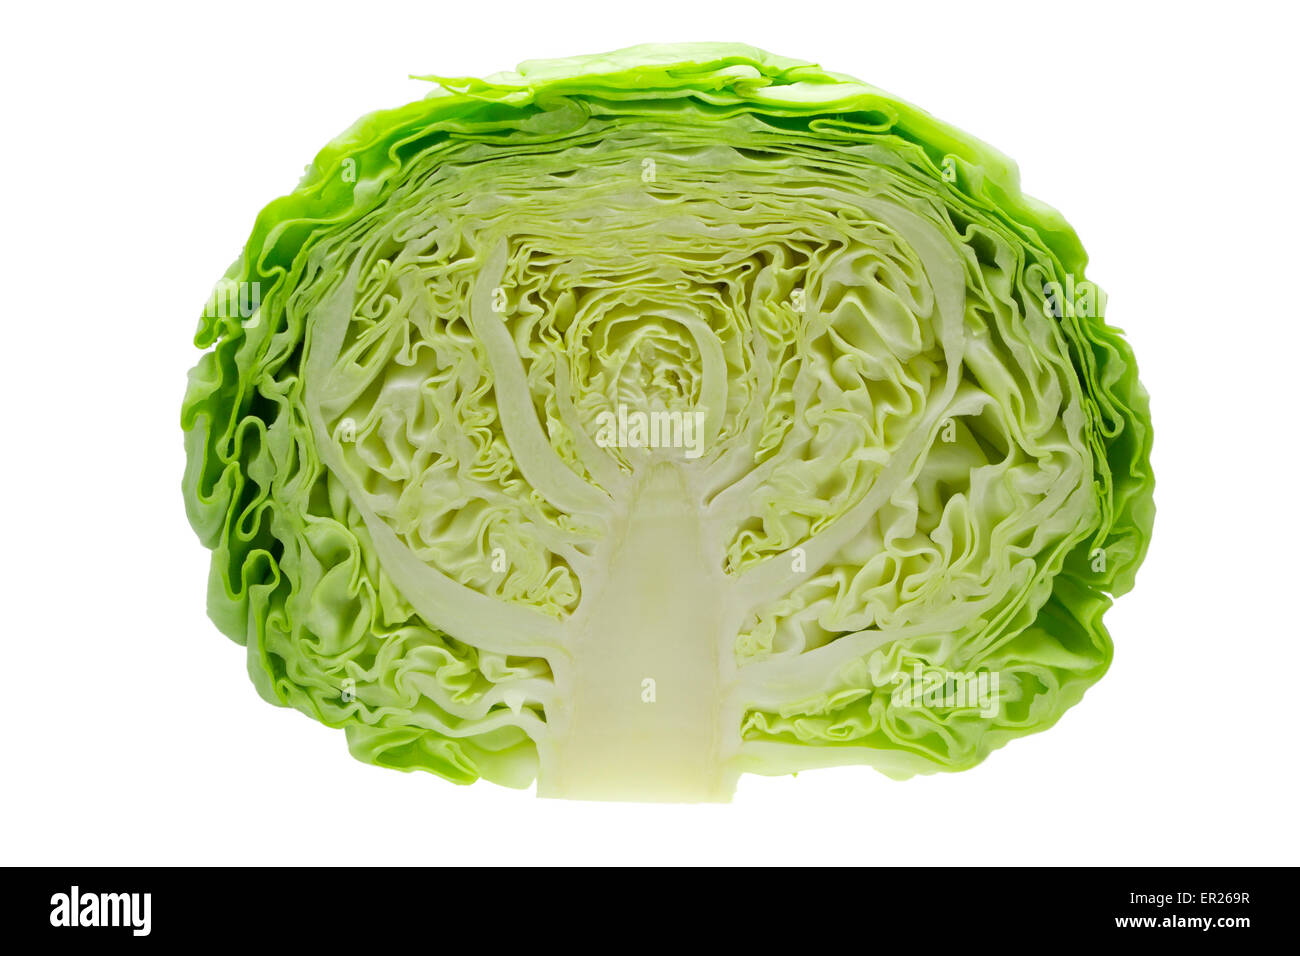 Cabbage cut in half Cut Out Stock Images & Pictures - Alamy